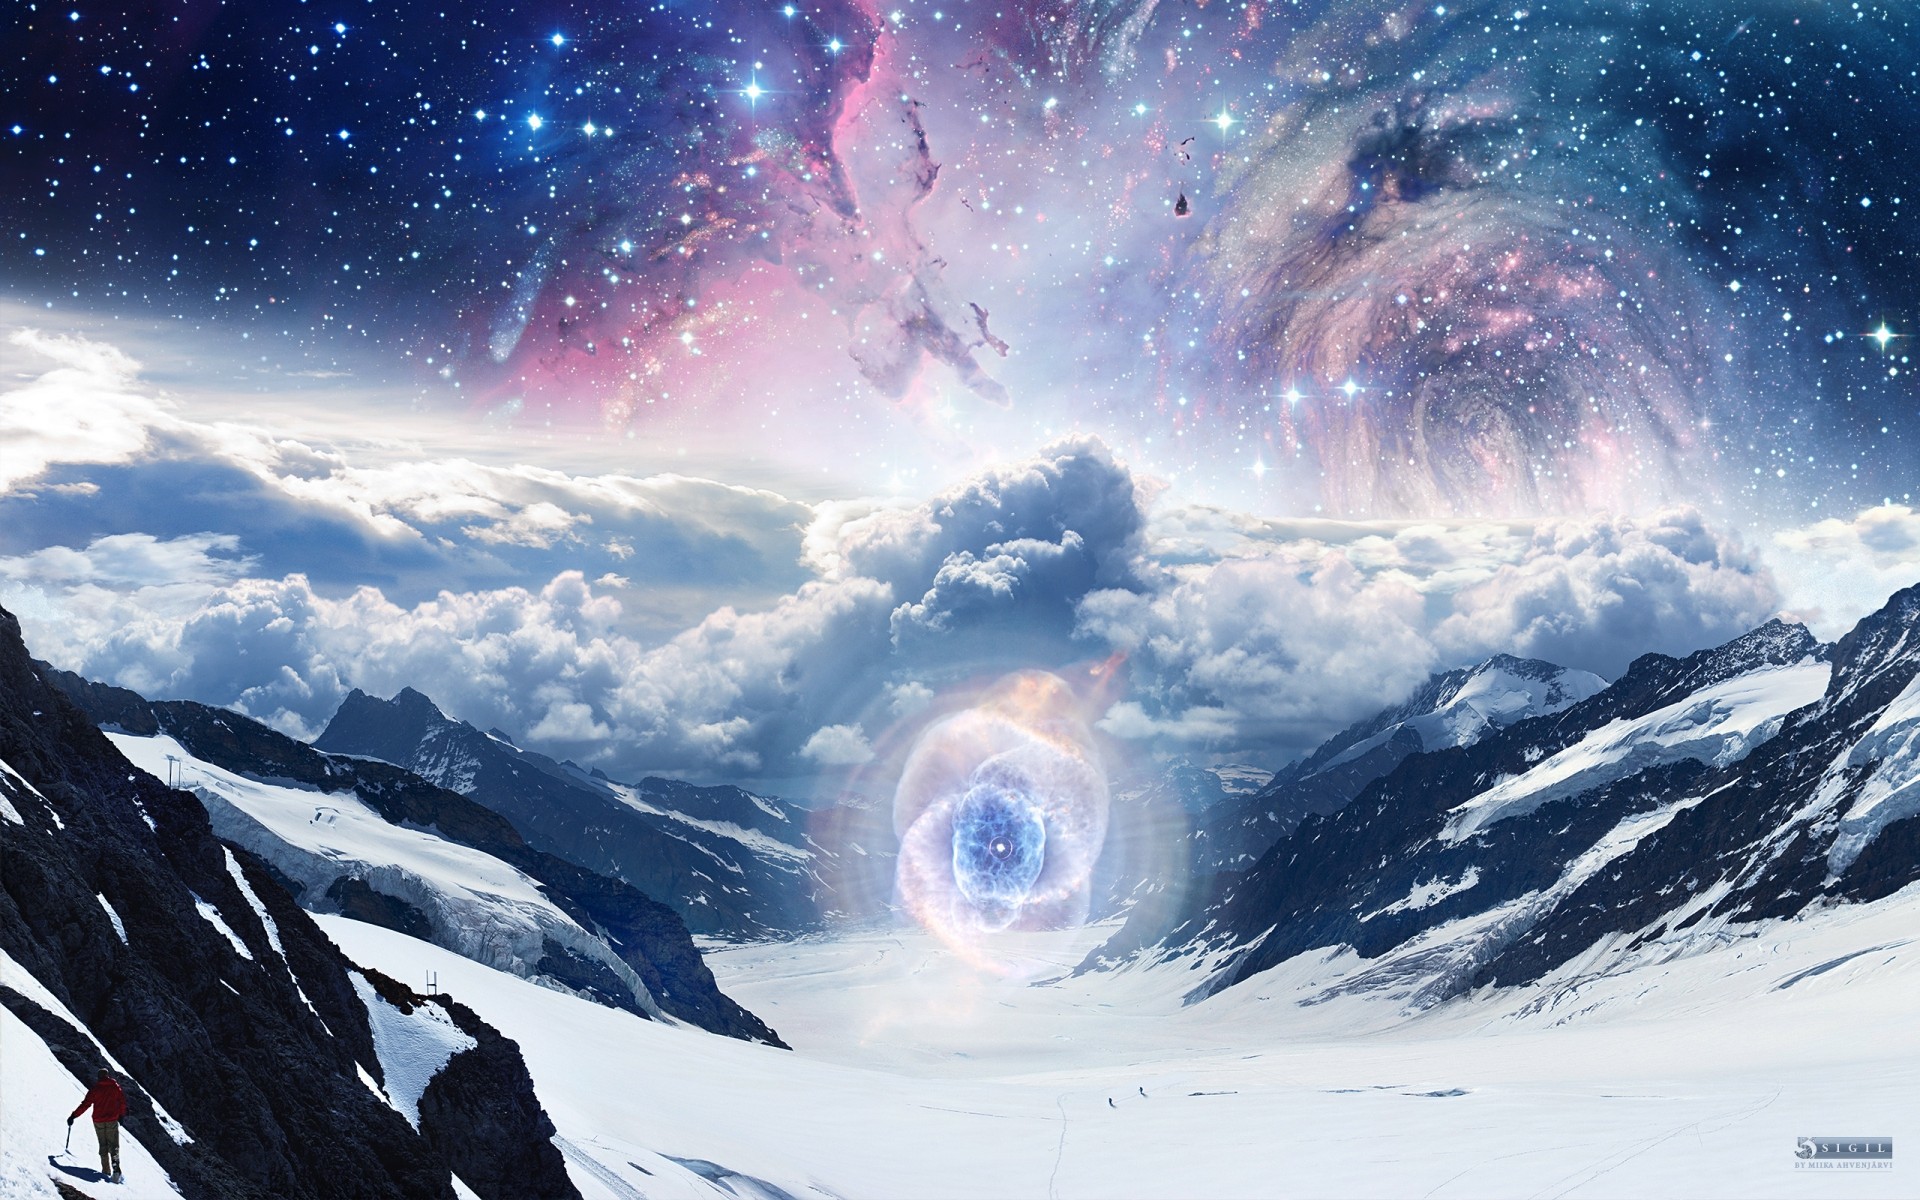 photo manipulation snow winter exploration mountain cold sky ice landscape mountains clouds stars